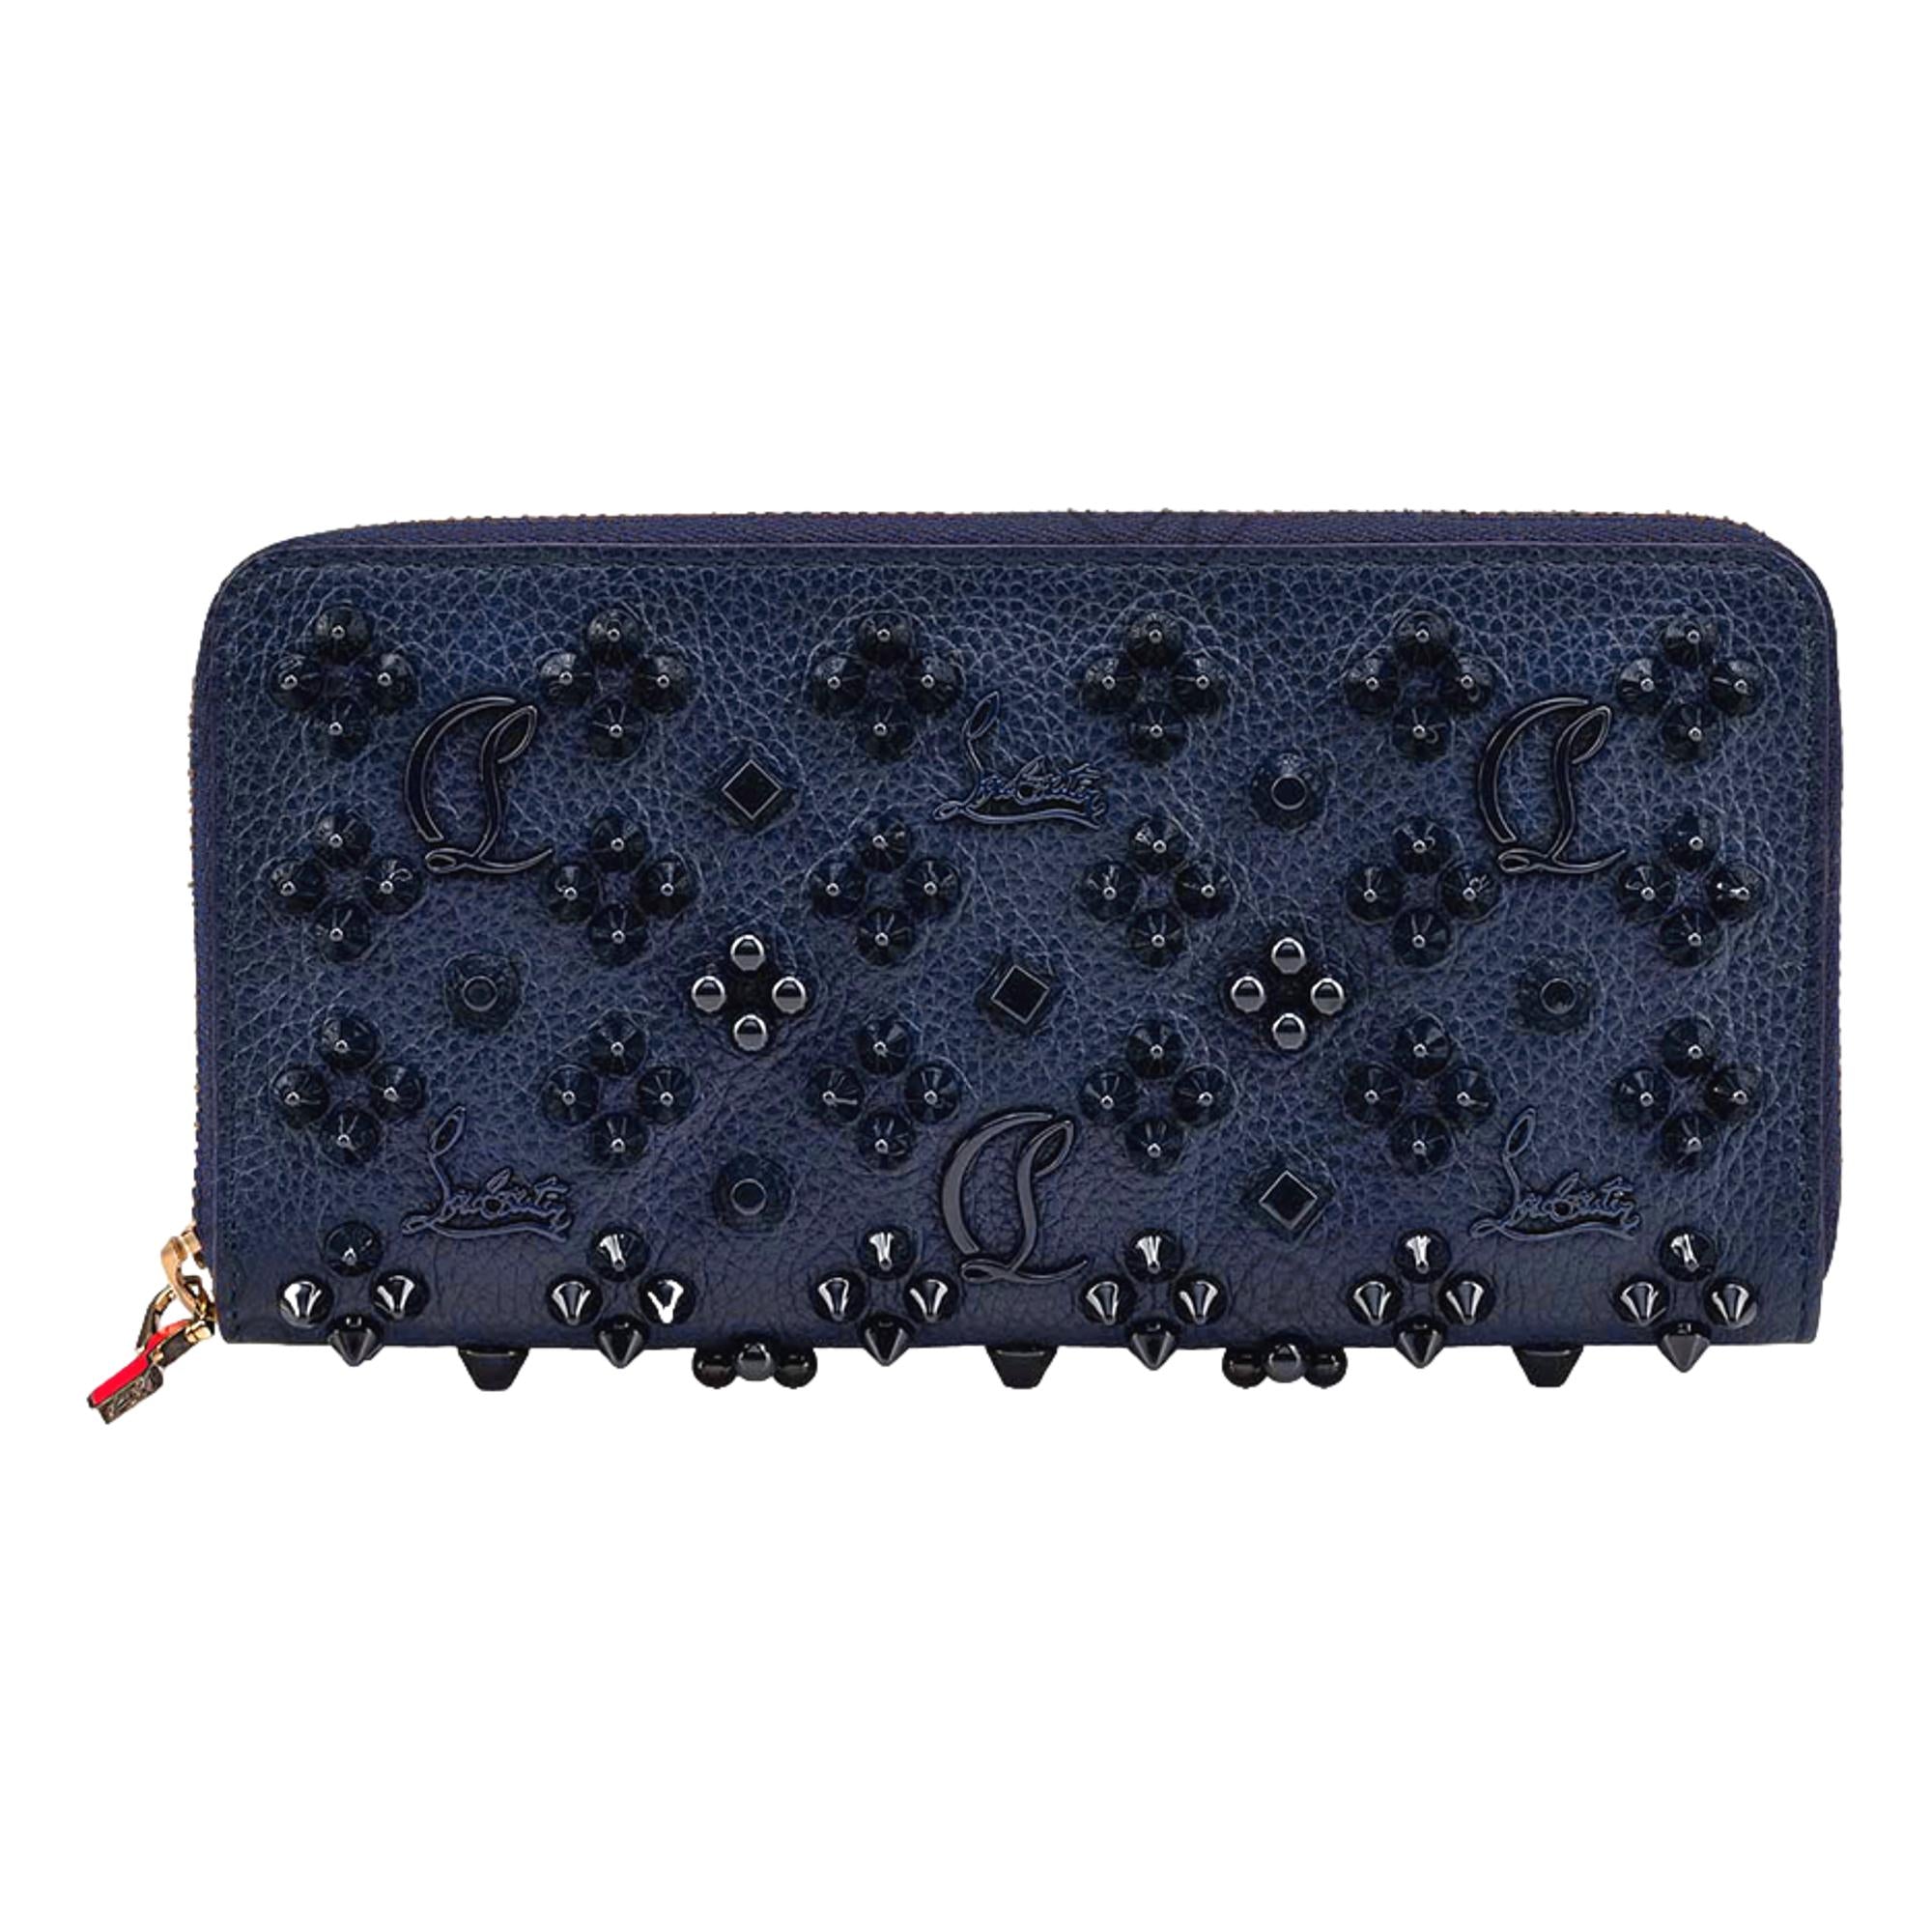 Christian Louboutin Panettone Studded Blue Leather Zip Around Wallet 3175224